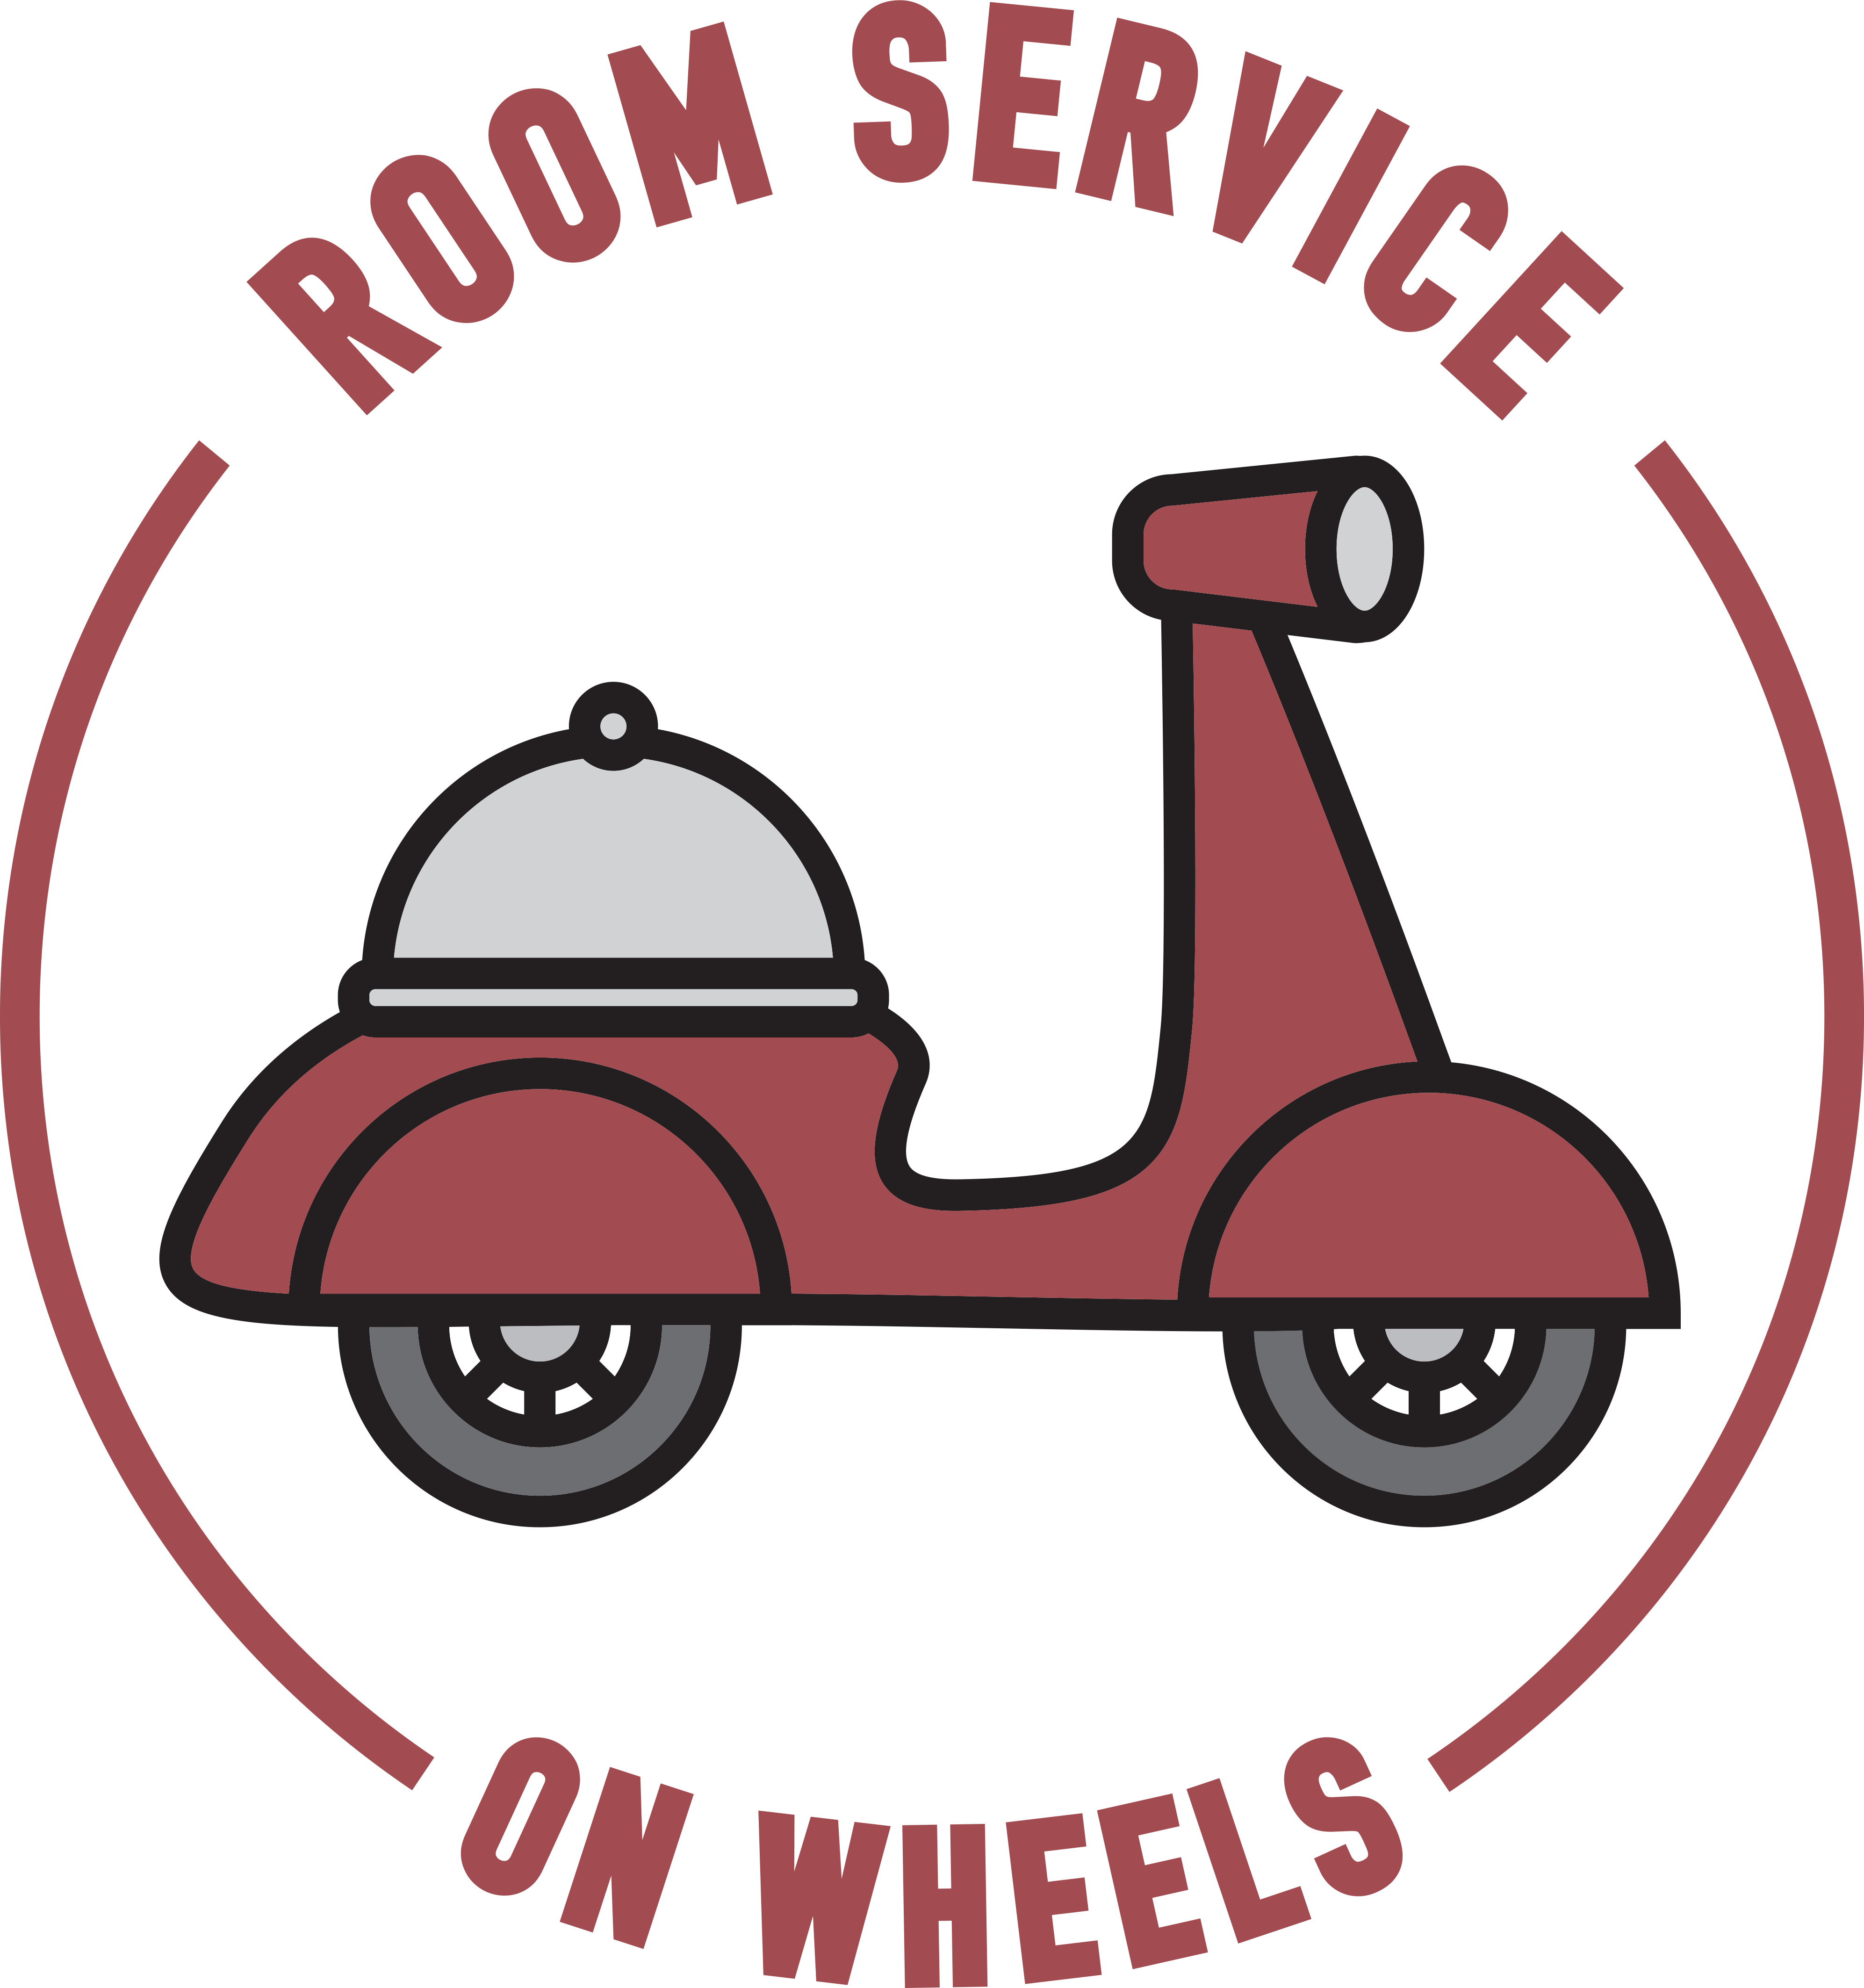 Room Service on Wheels Home